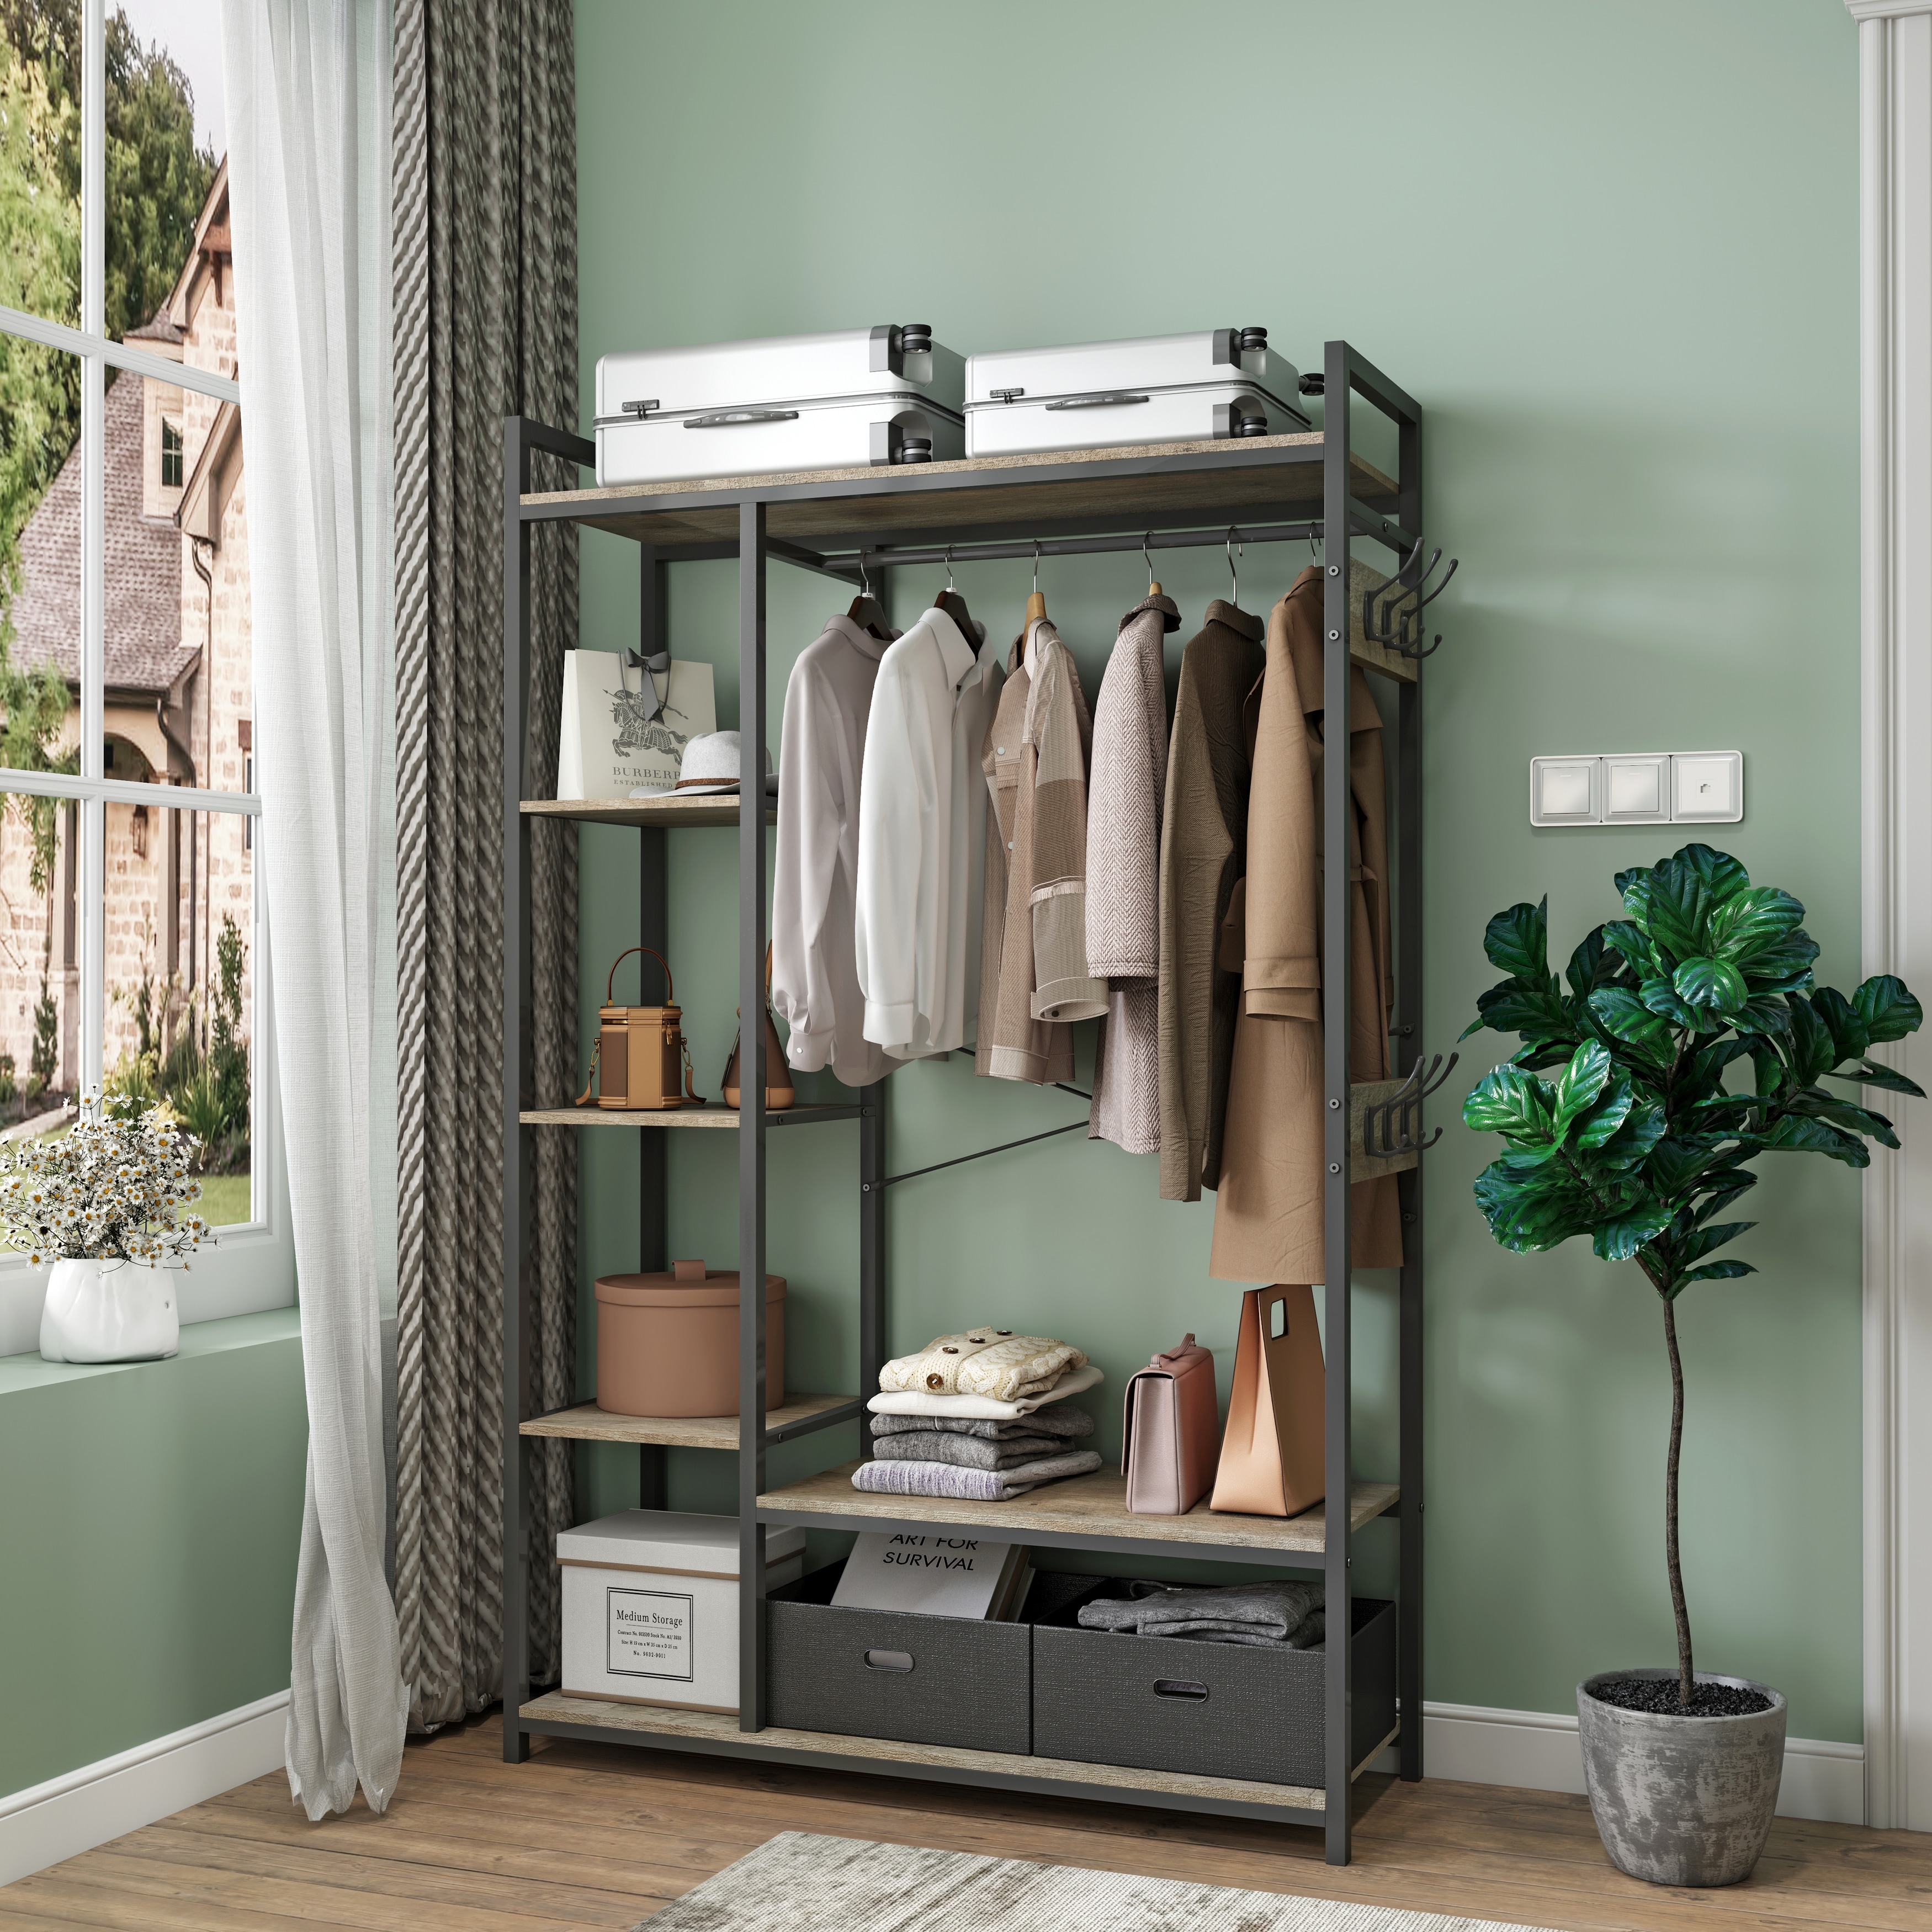 https://ak1.ostkcdn.com/images/products/is/images/direct/e3238ecf1d2baf00ff3a37ea6320e6469bb98f75/Free-Standing-Closet-Organizer%2C-Portable-Garment-Rack-with-Open-Shelves-and-Hanging-Rod%2C-Black-Metal-Frame.jpg